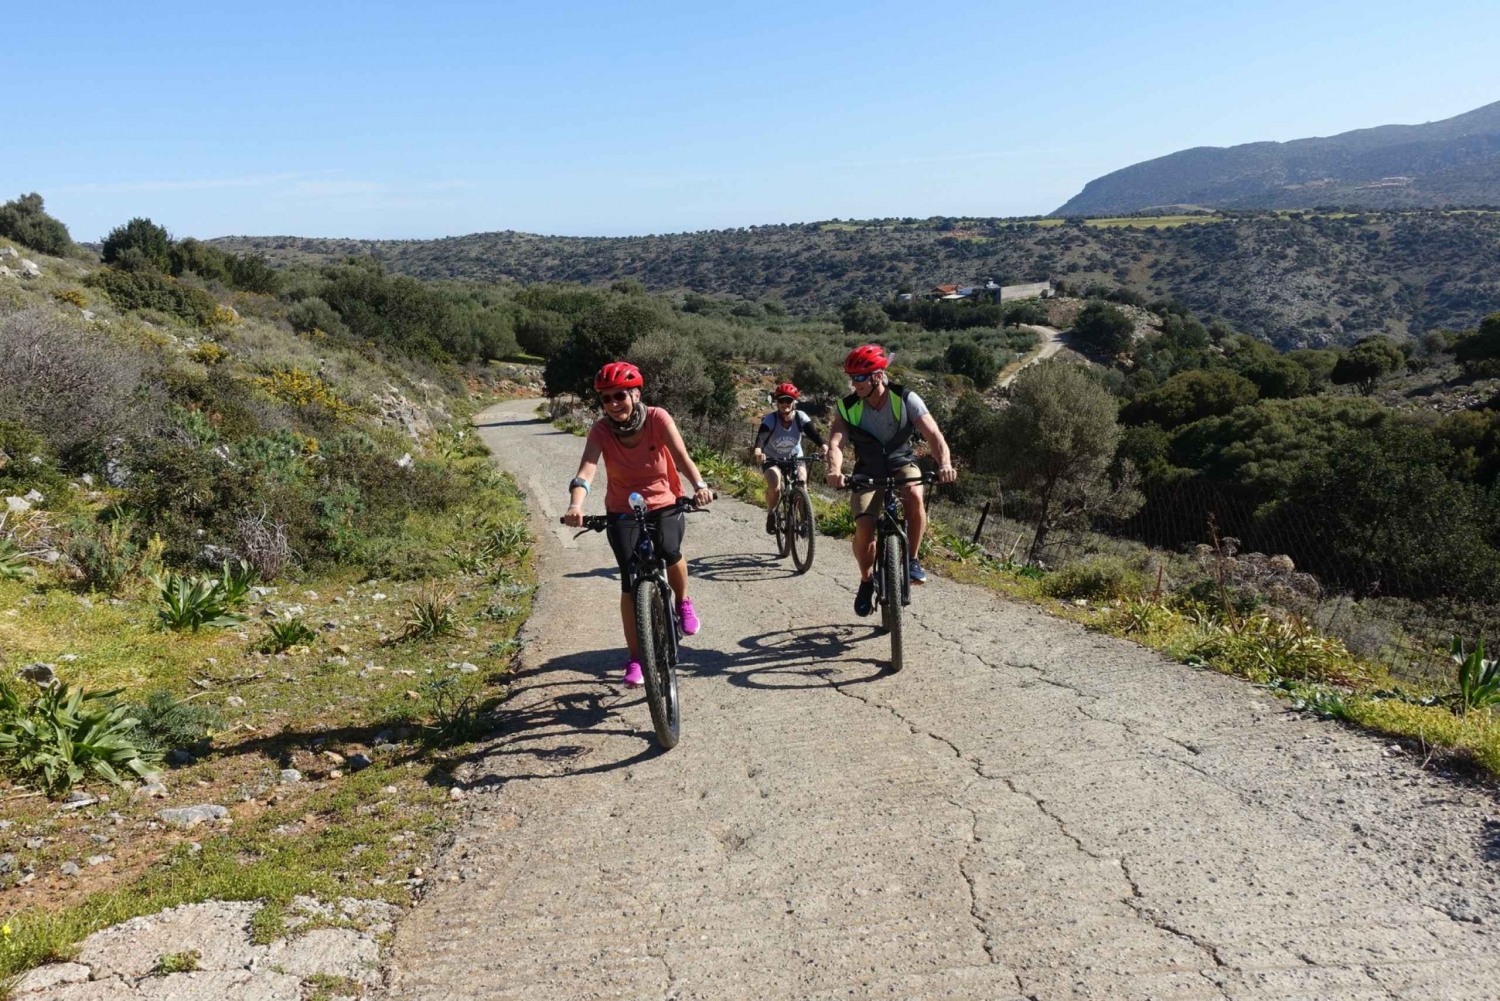 E-Bike tour in the Cretan nature with traditional brunch